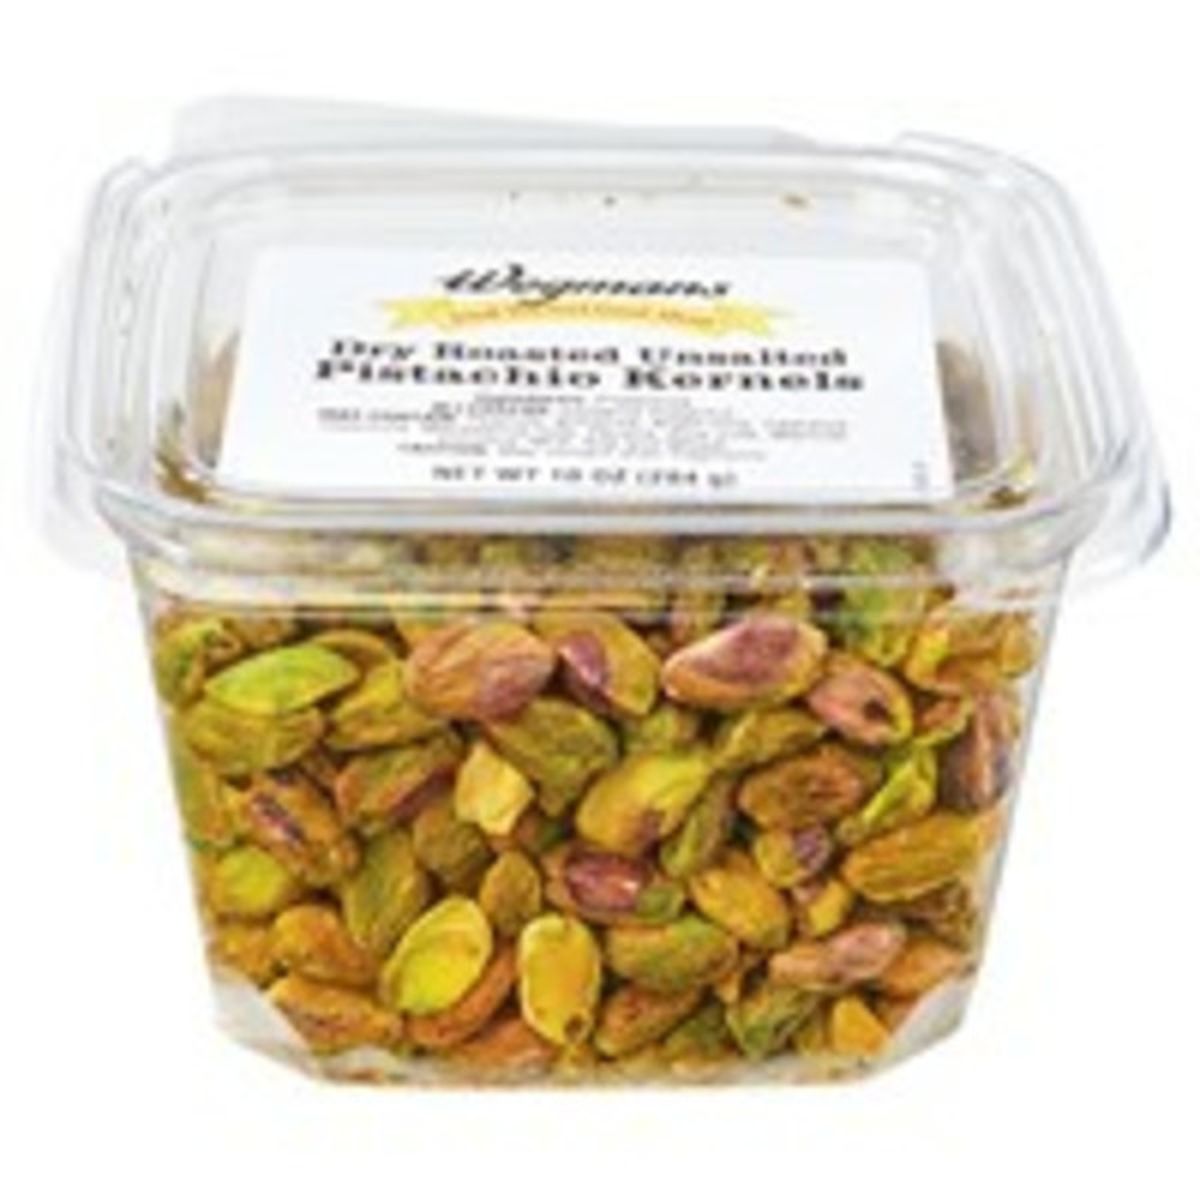 Calories in Wegmans Dry Roasted Unsalted Pistachio Kernels